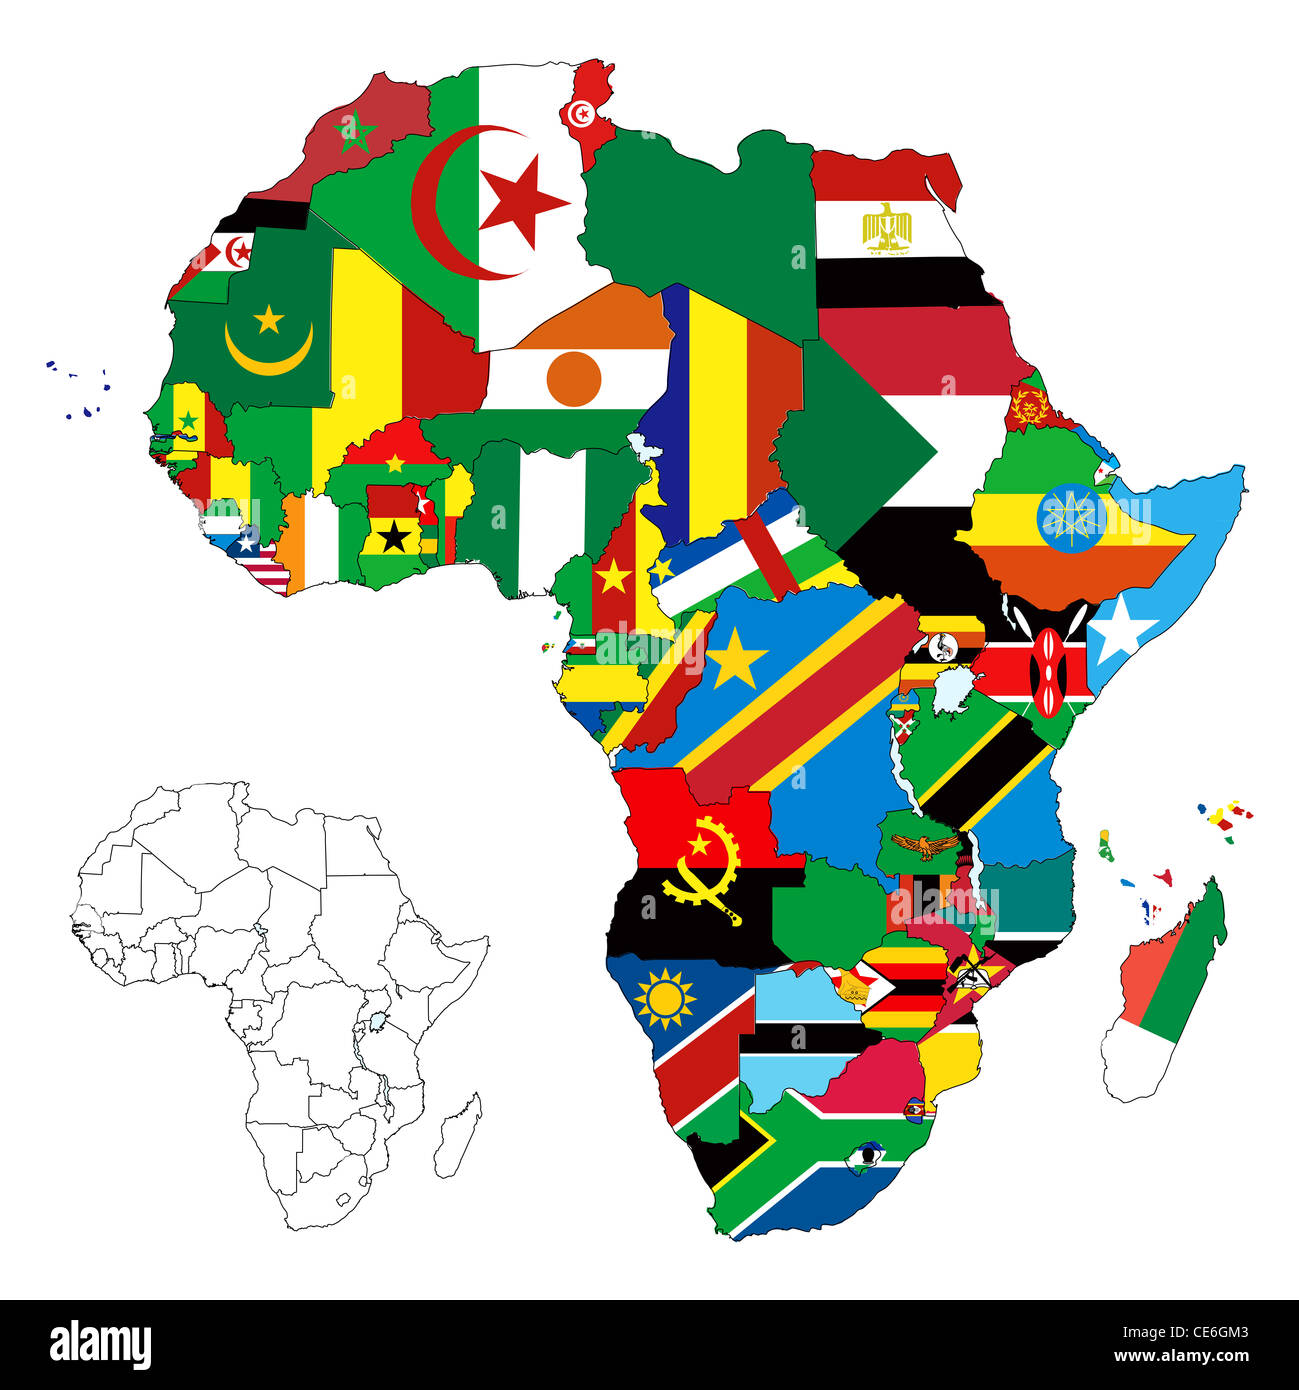 Illustration of African of all countries Stock Photo